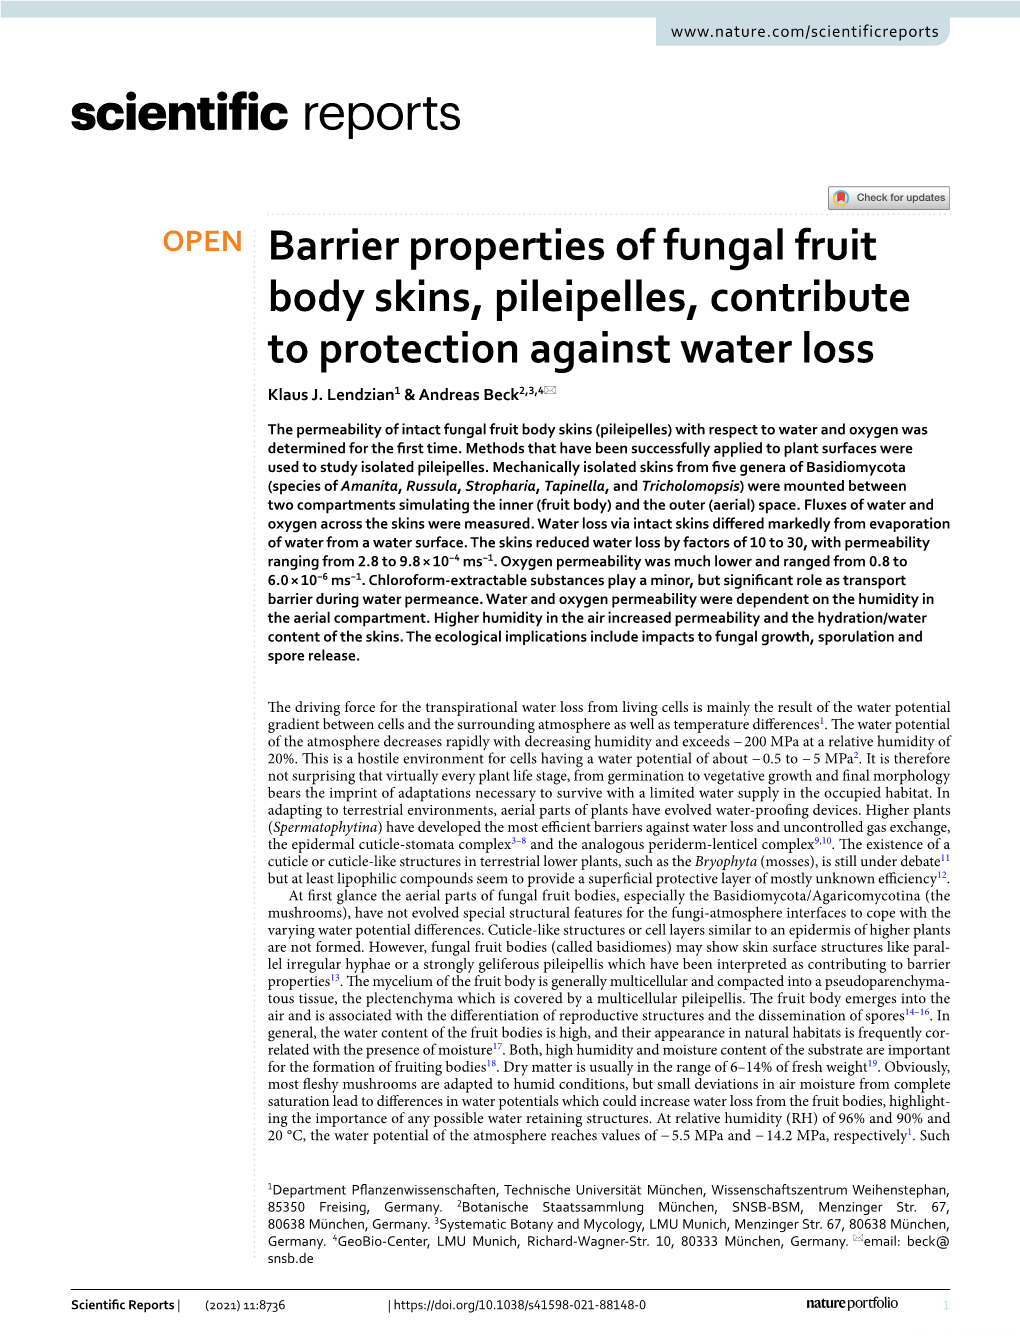 Barrier Properties of Fungal Fruit Body Skins, Pileipelles, Contribute to Protection Against Water Loss Klaus J